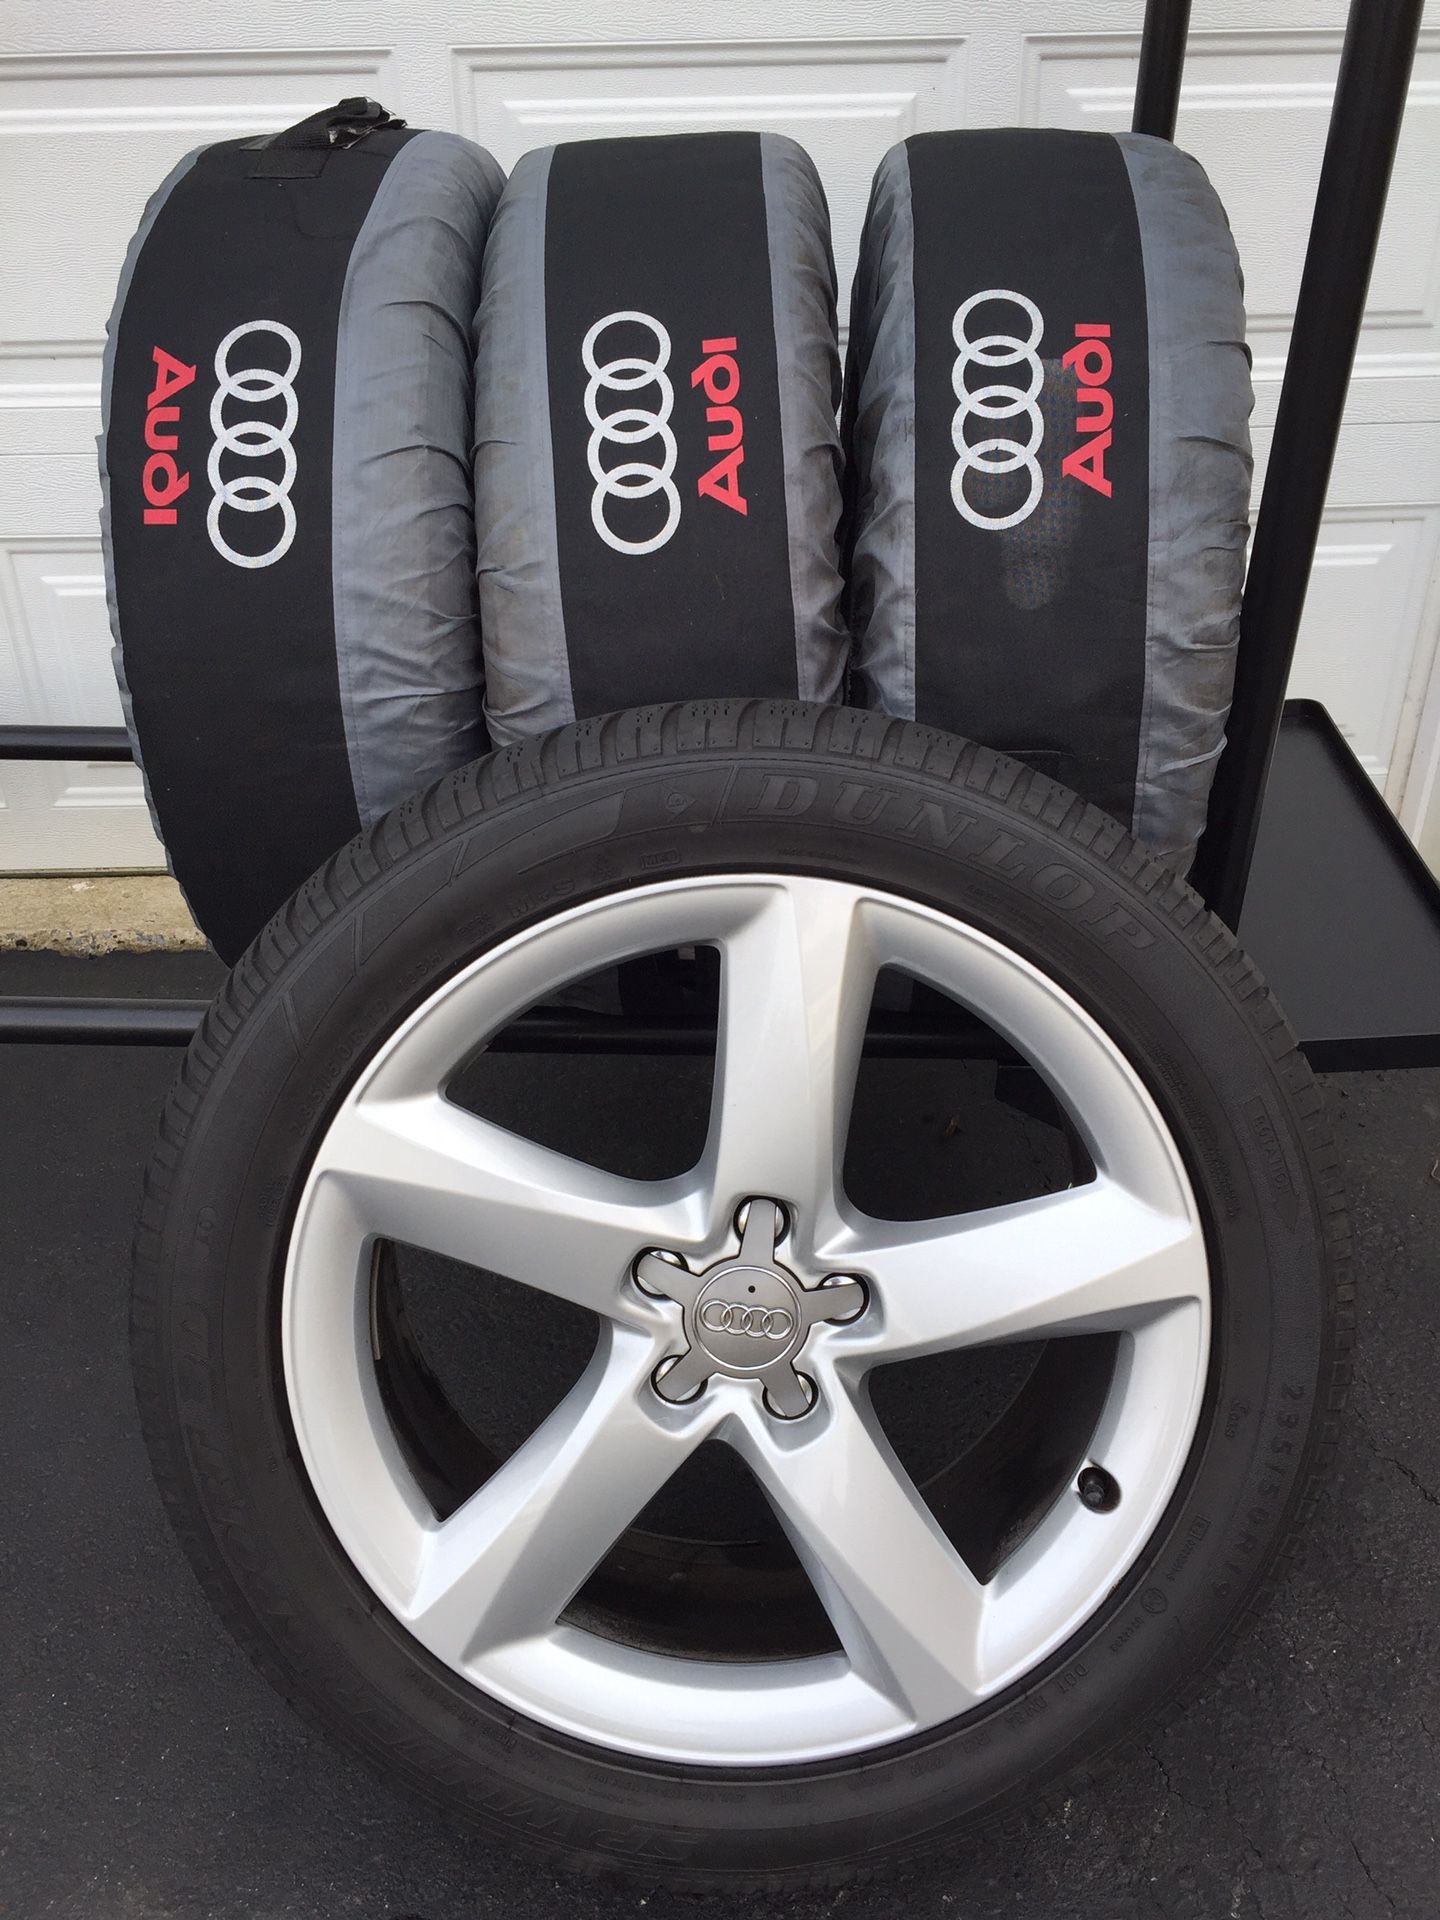 Four 2015 Audi A8 - S8 wheels and tires.